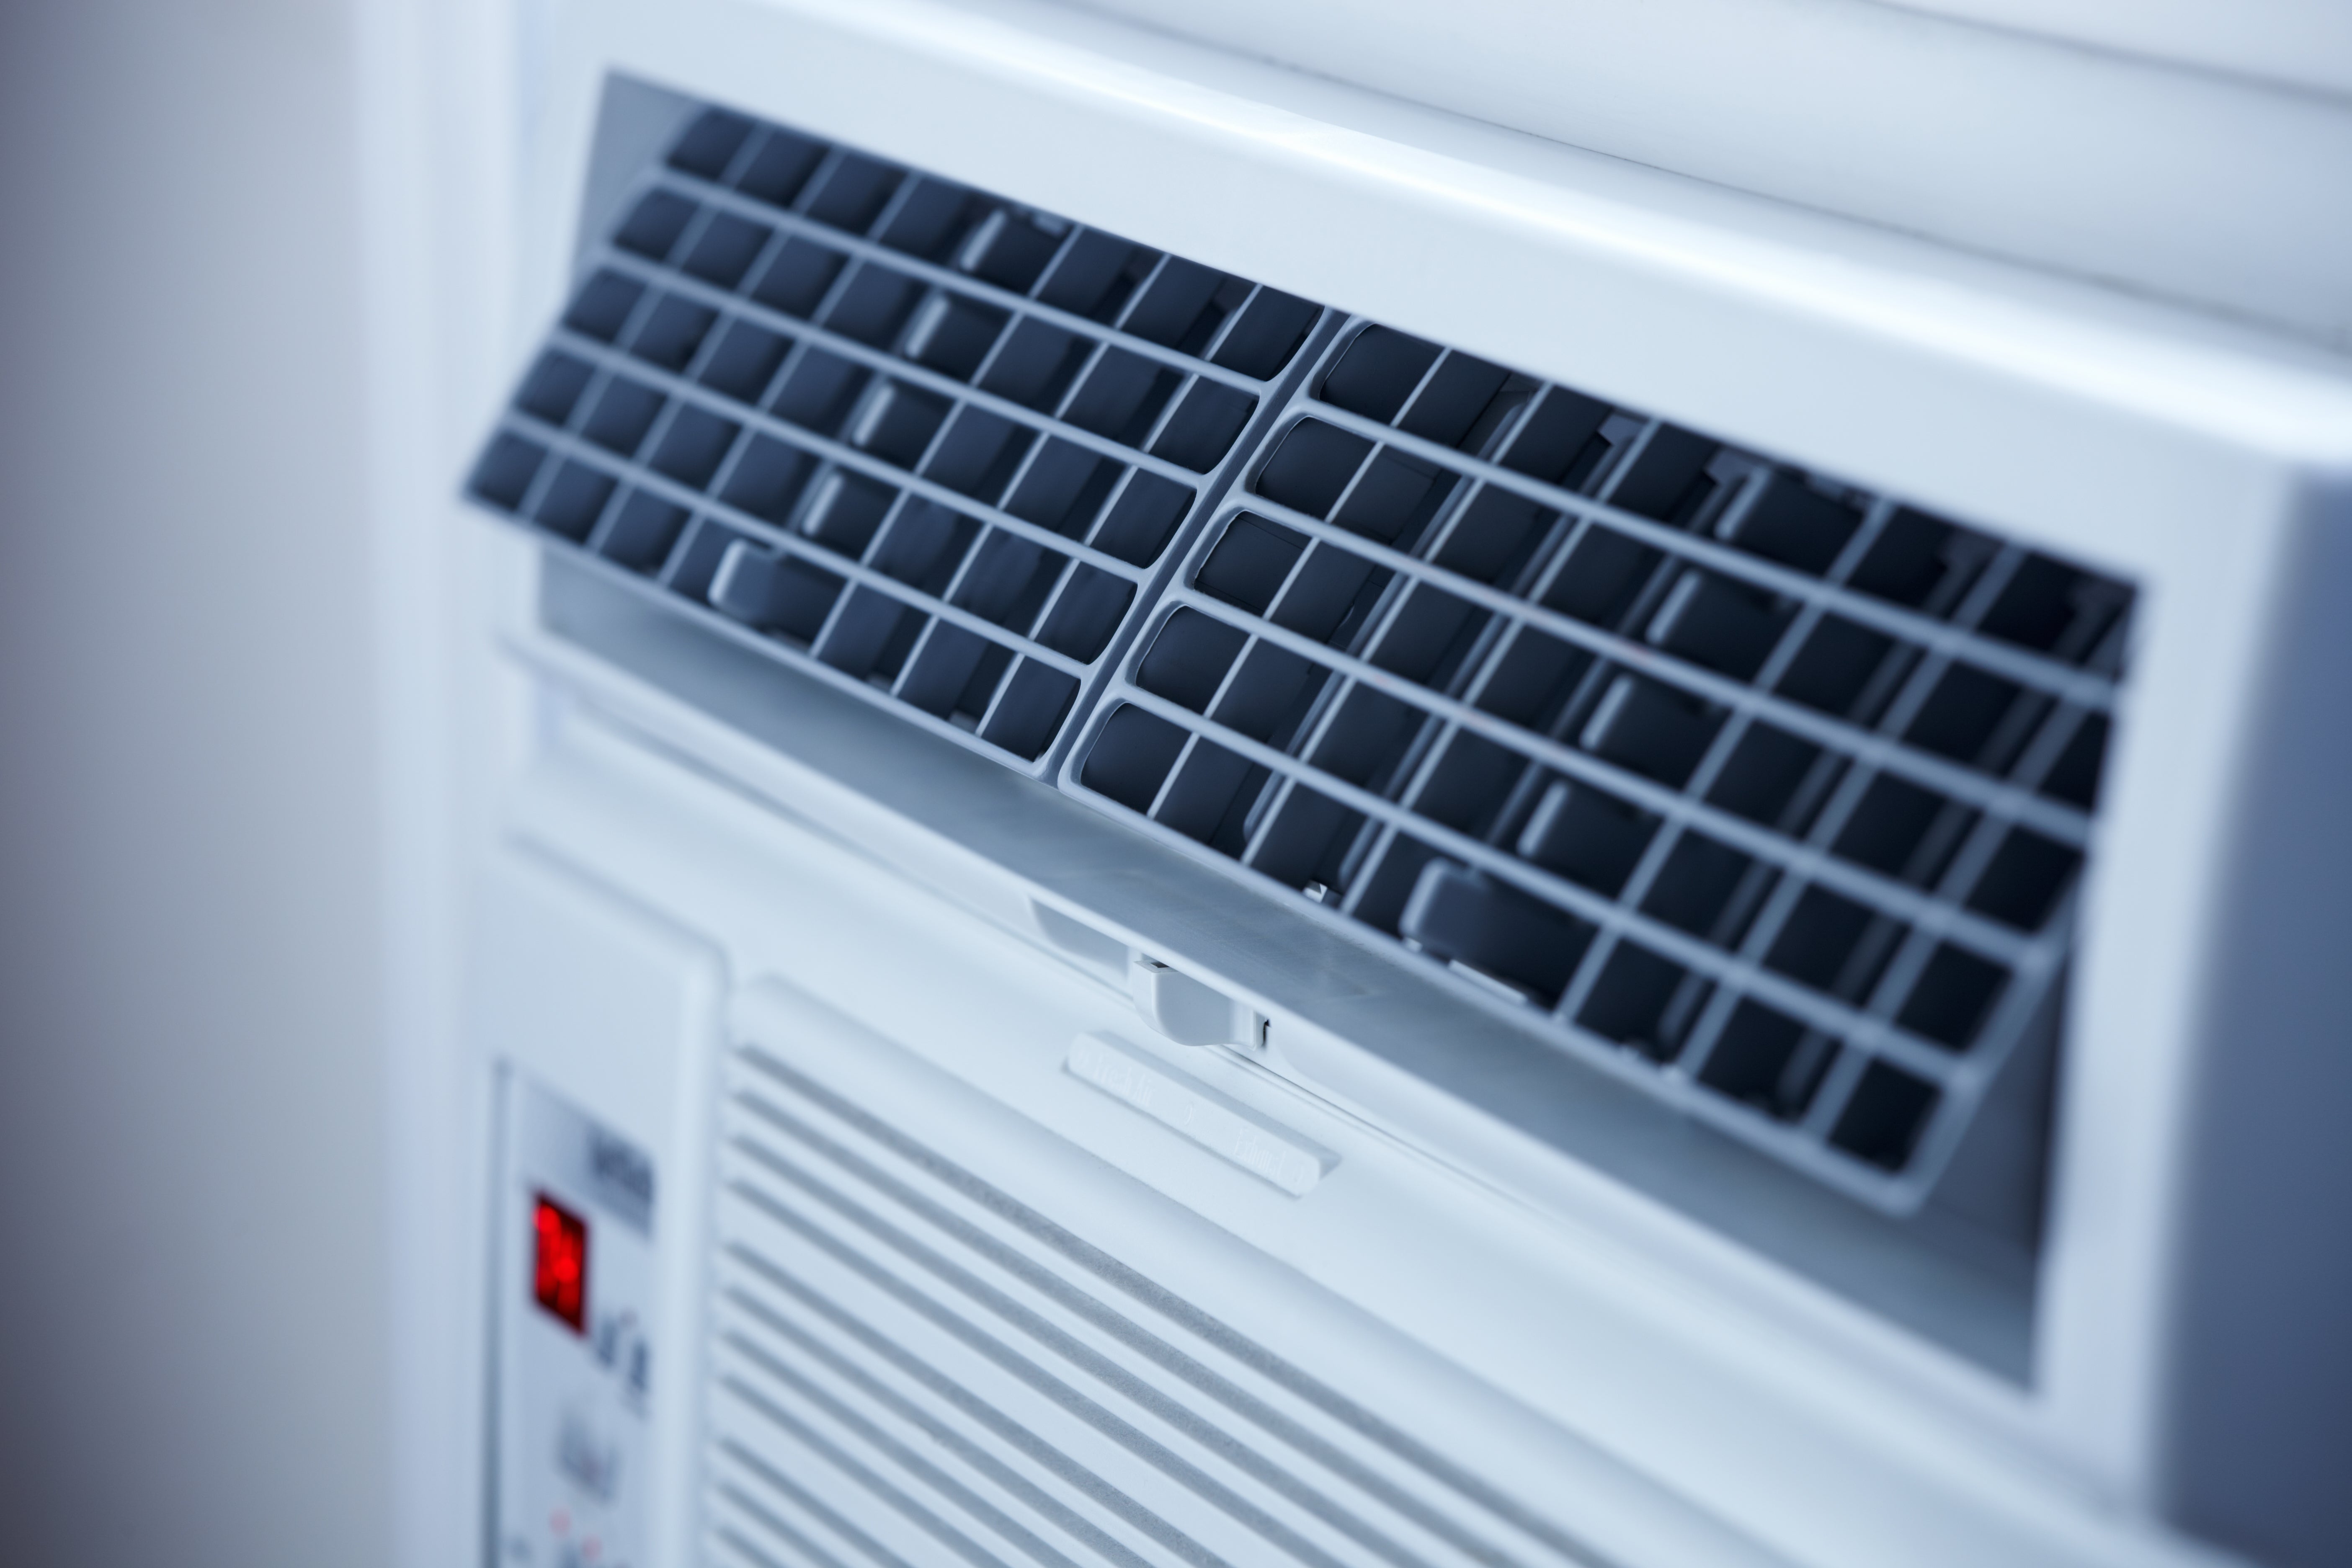 The best window and portable AC units to keep you cool this summer